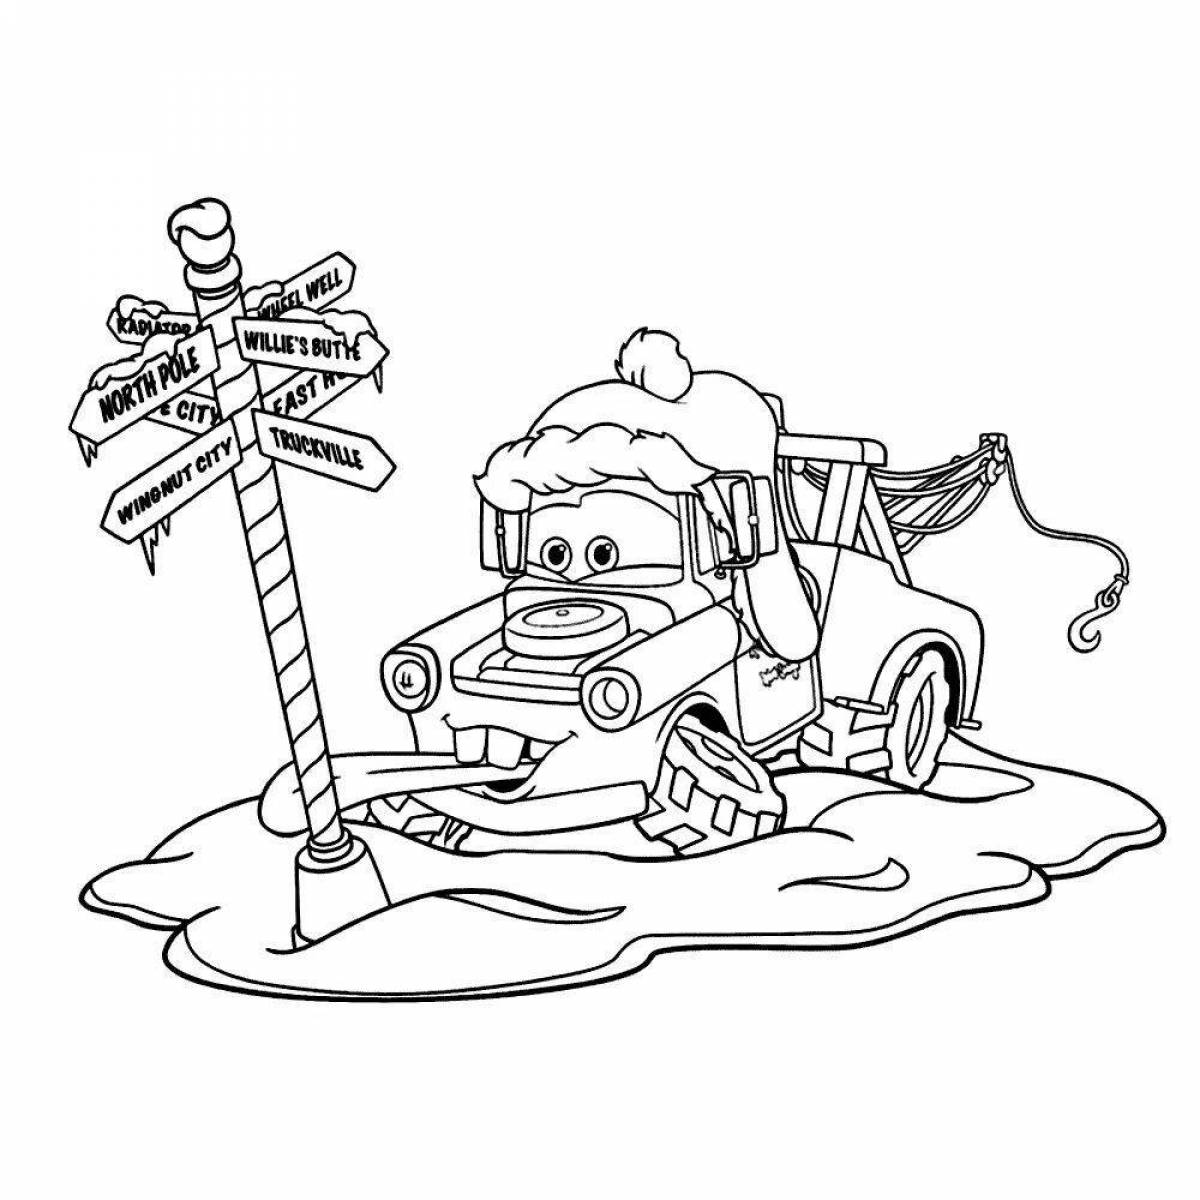 Adorable Christmas car coloring page